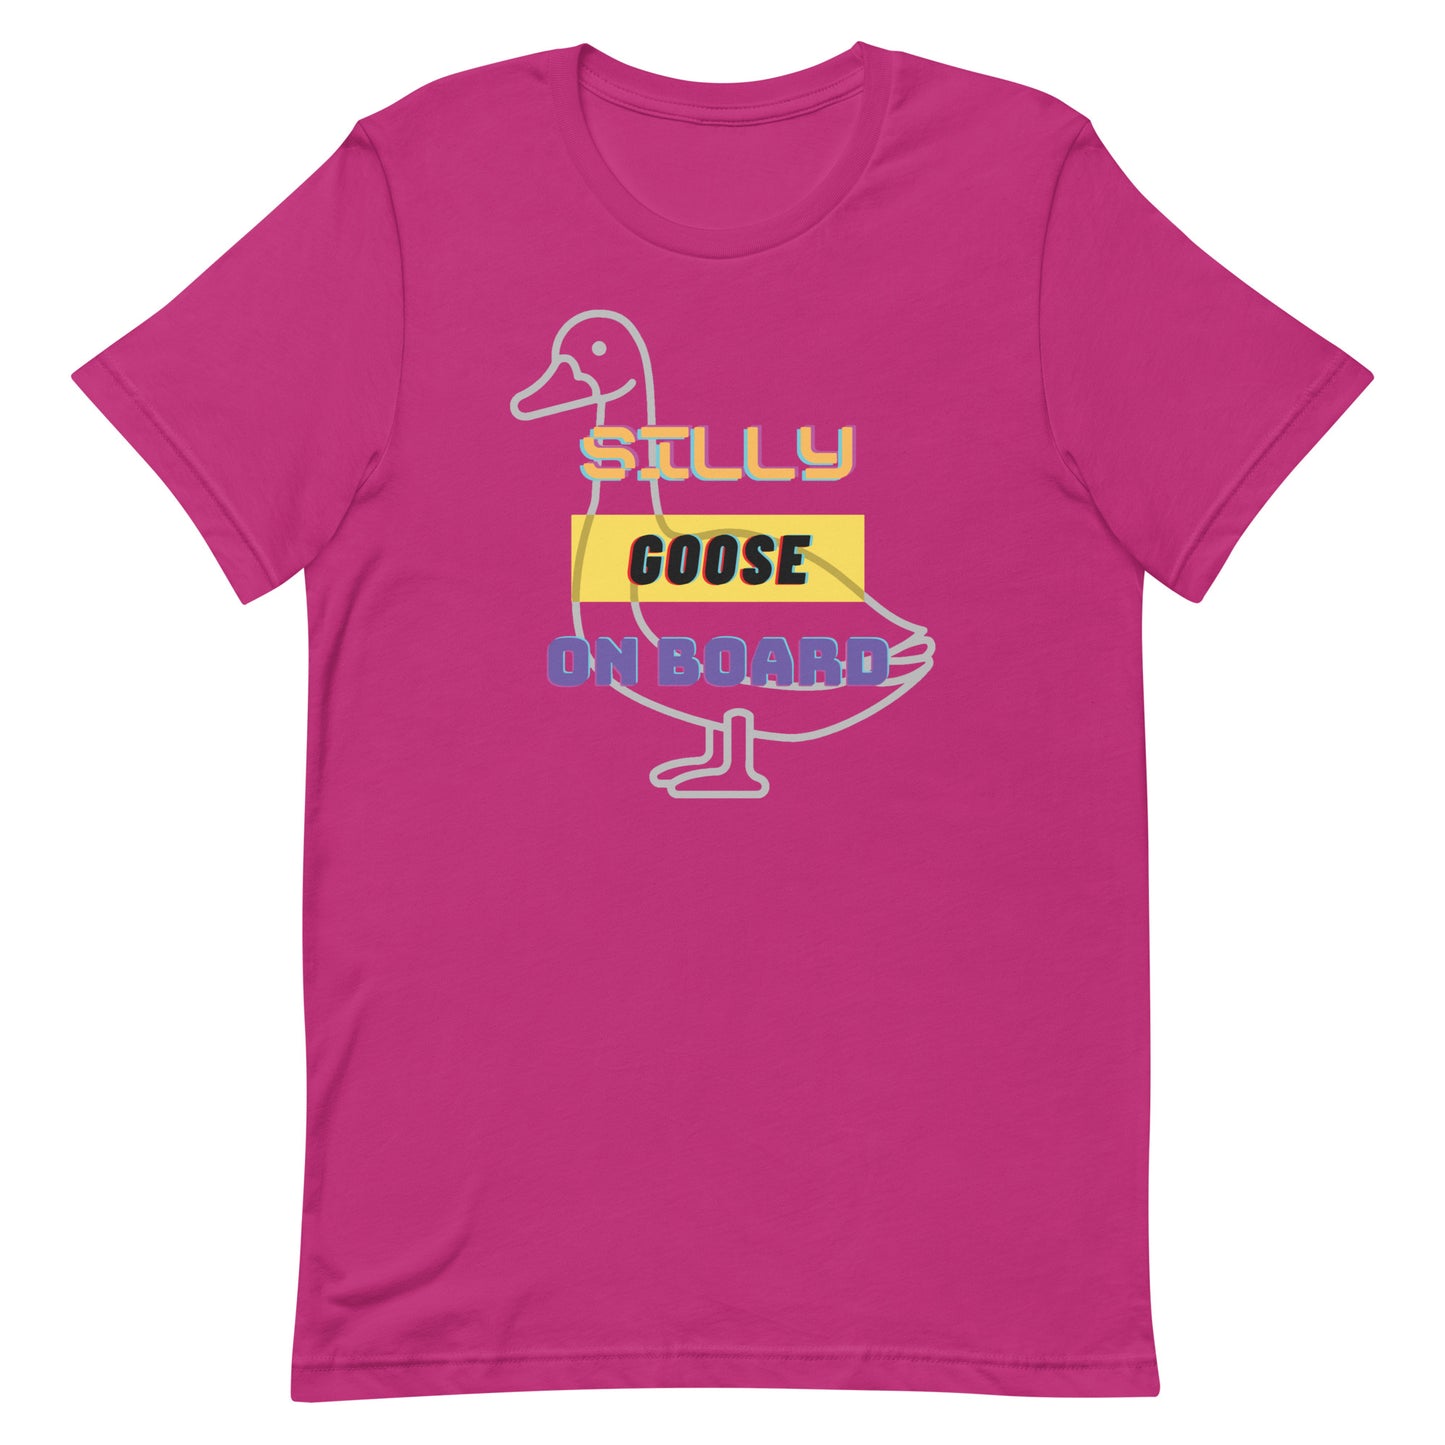 Silly Goose Onboard Unisex t-shirt